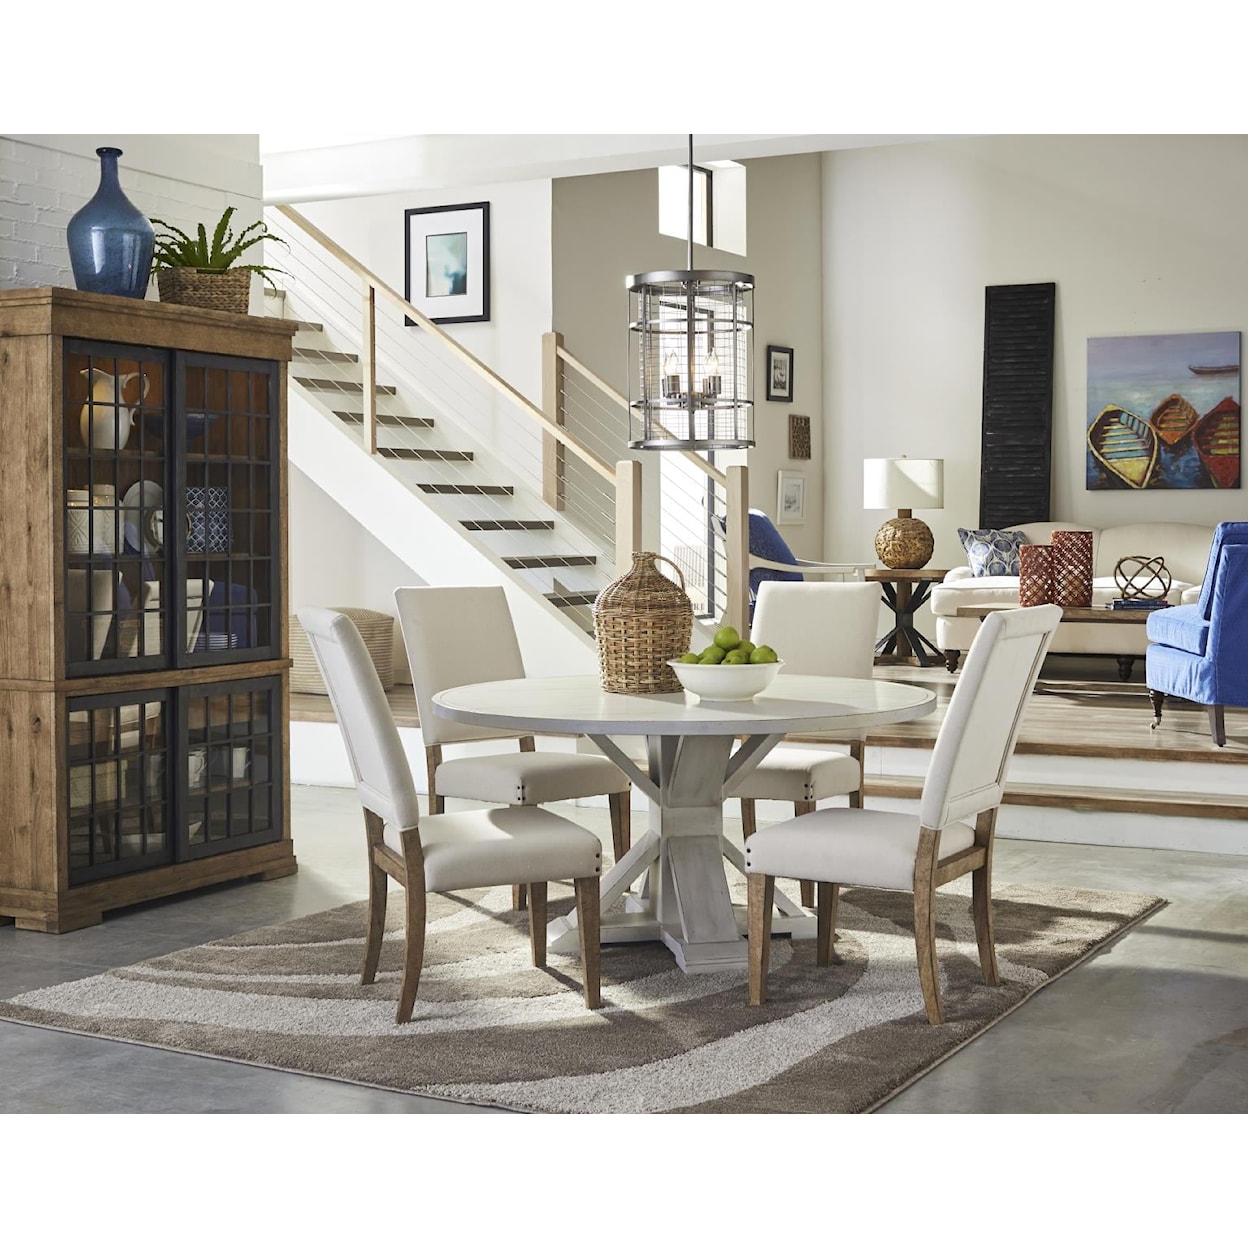 Trisha Yearwood Home Collection by Legacy Classic Coming Home Arm Chair